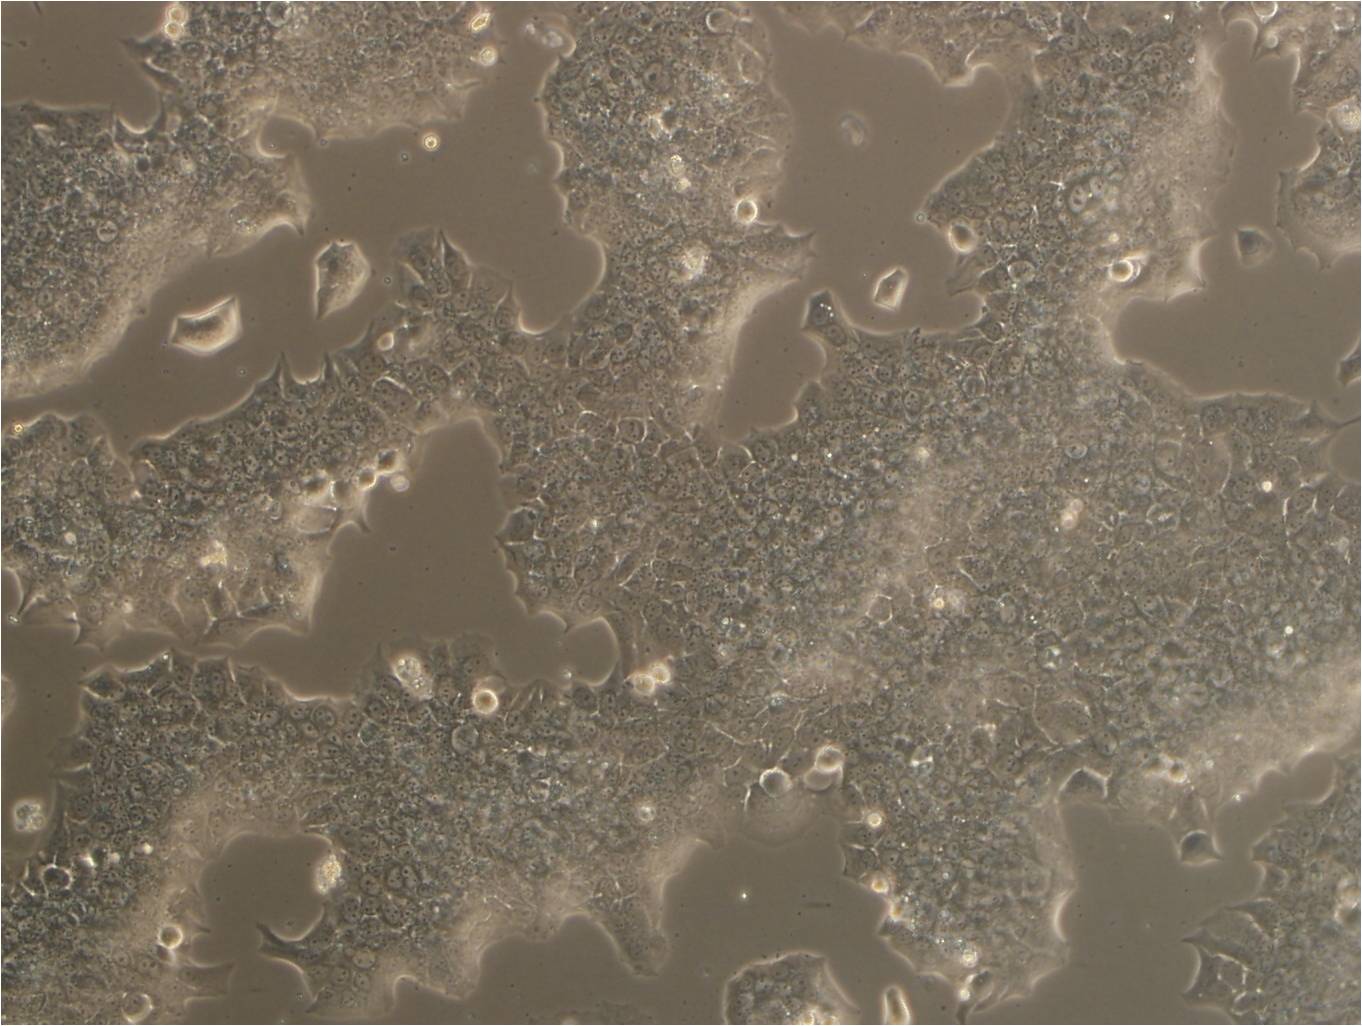 HAC-84 epithelioid cells人肺癌细胞系,HAC-84 epithelioid cells